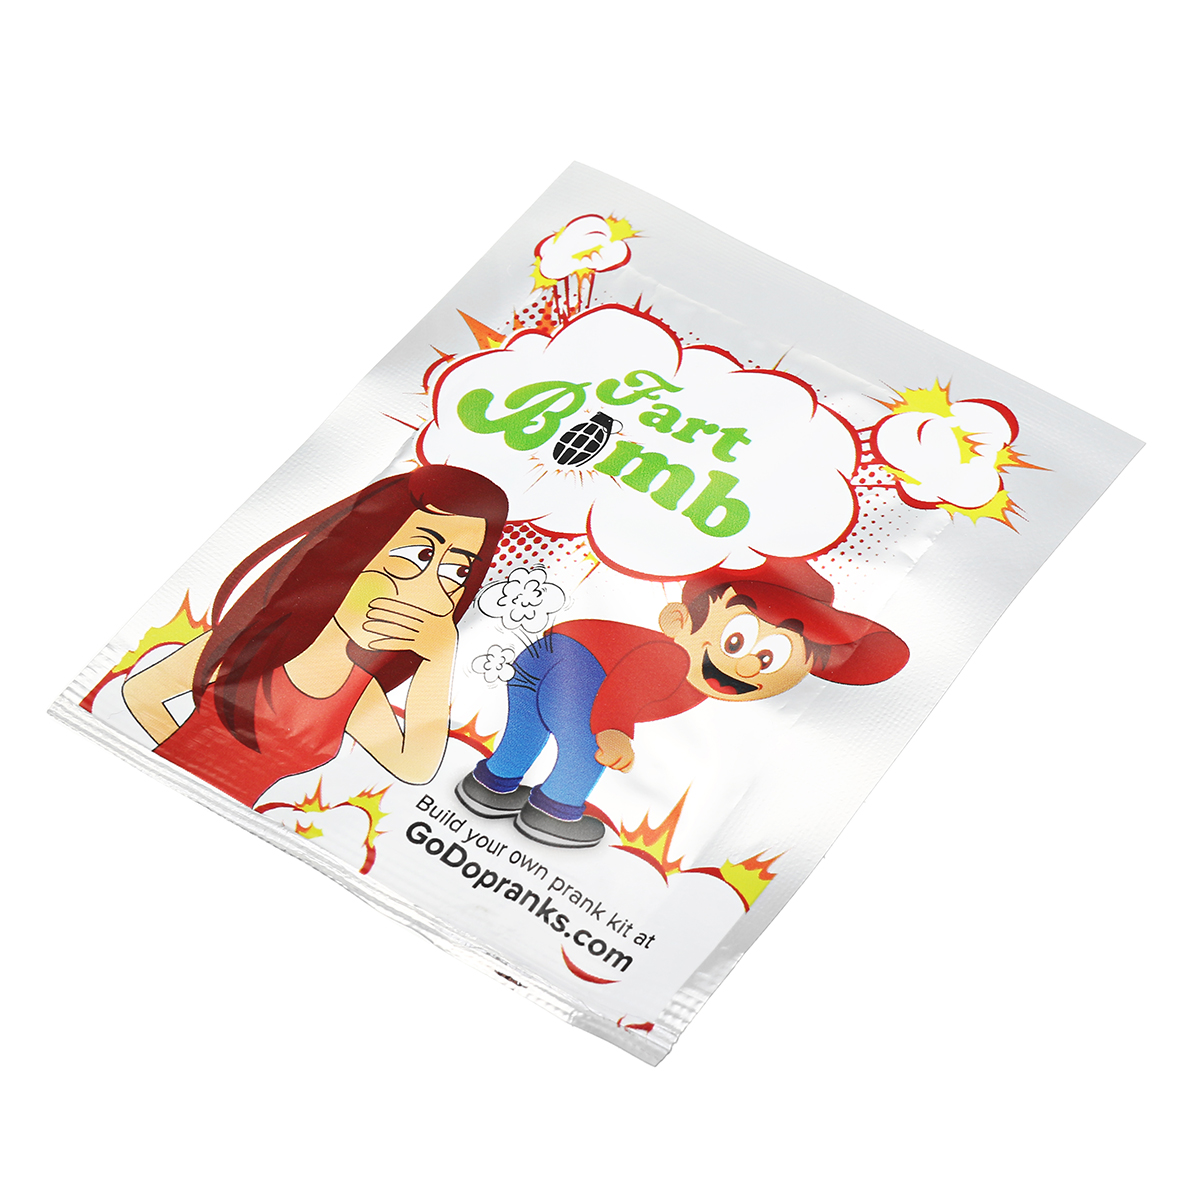 10Pcs-Funny-Fart-Bags-Stink-Smelly-Funny-Gags-Practical-Jokes-Novelties-Toy-April-Fools-Day-Tricky-T-1435713